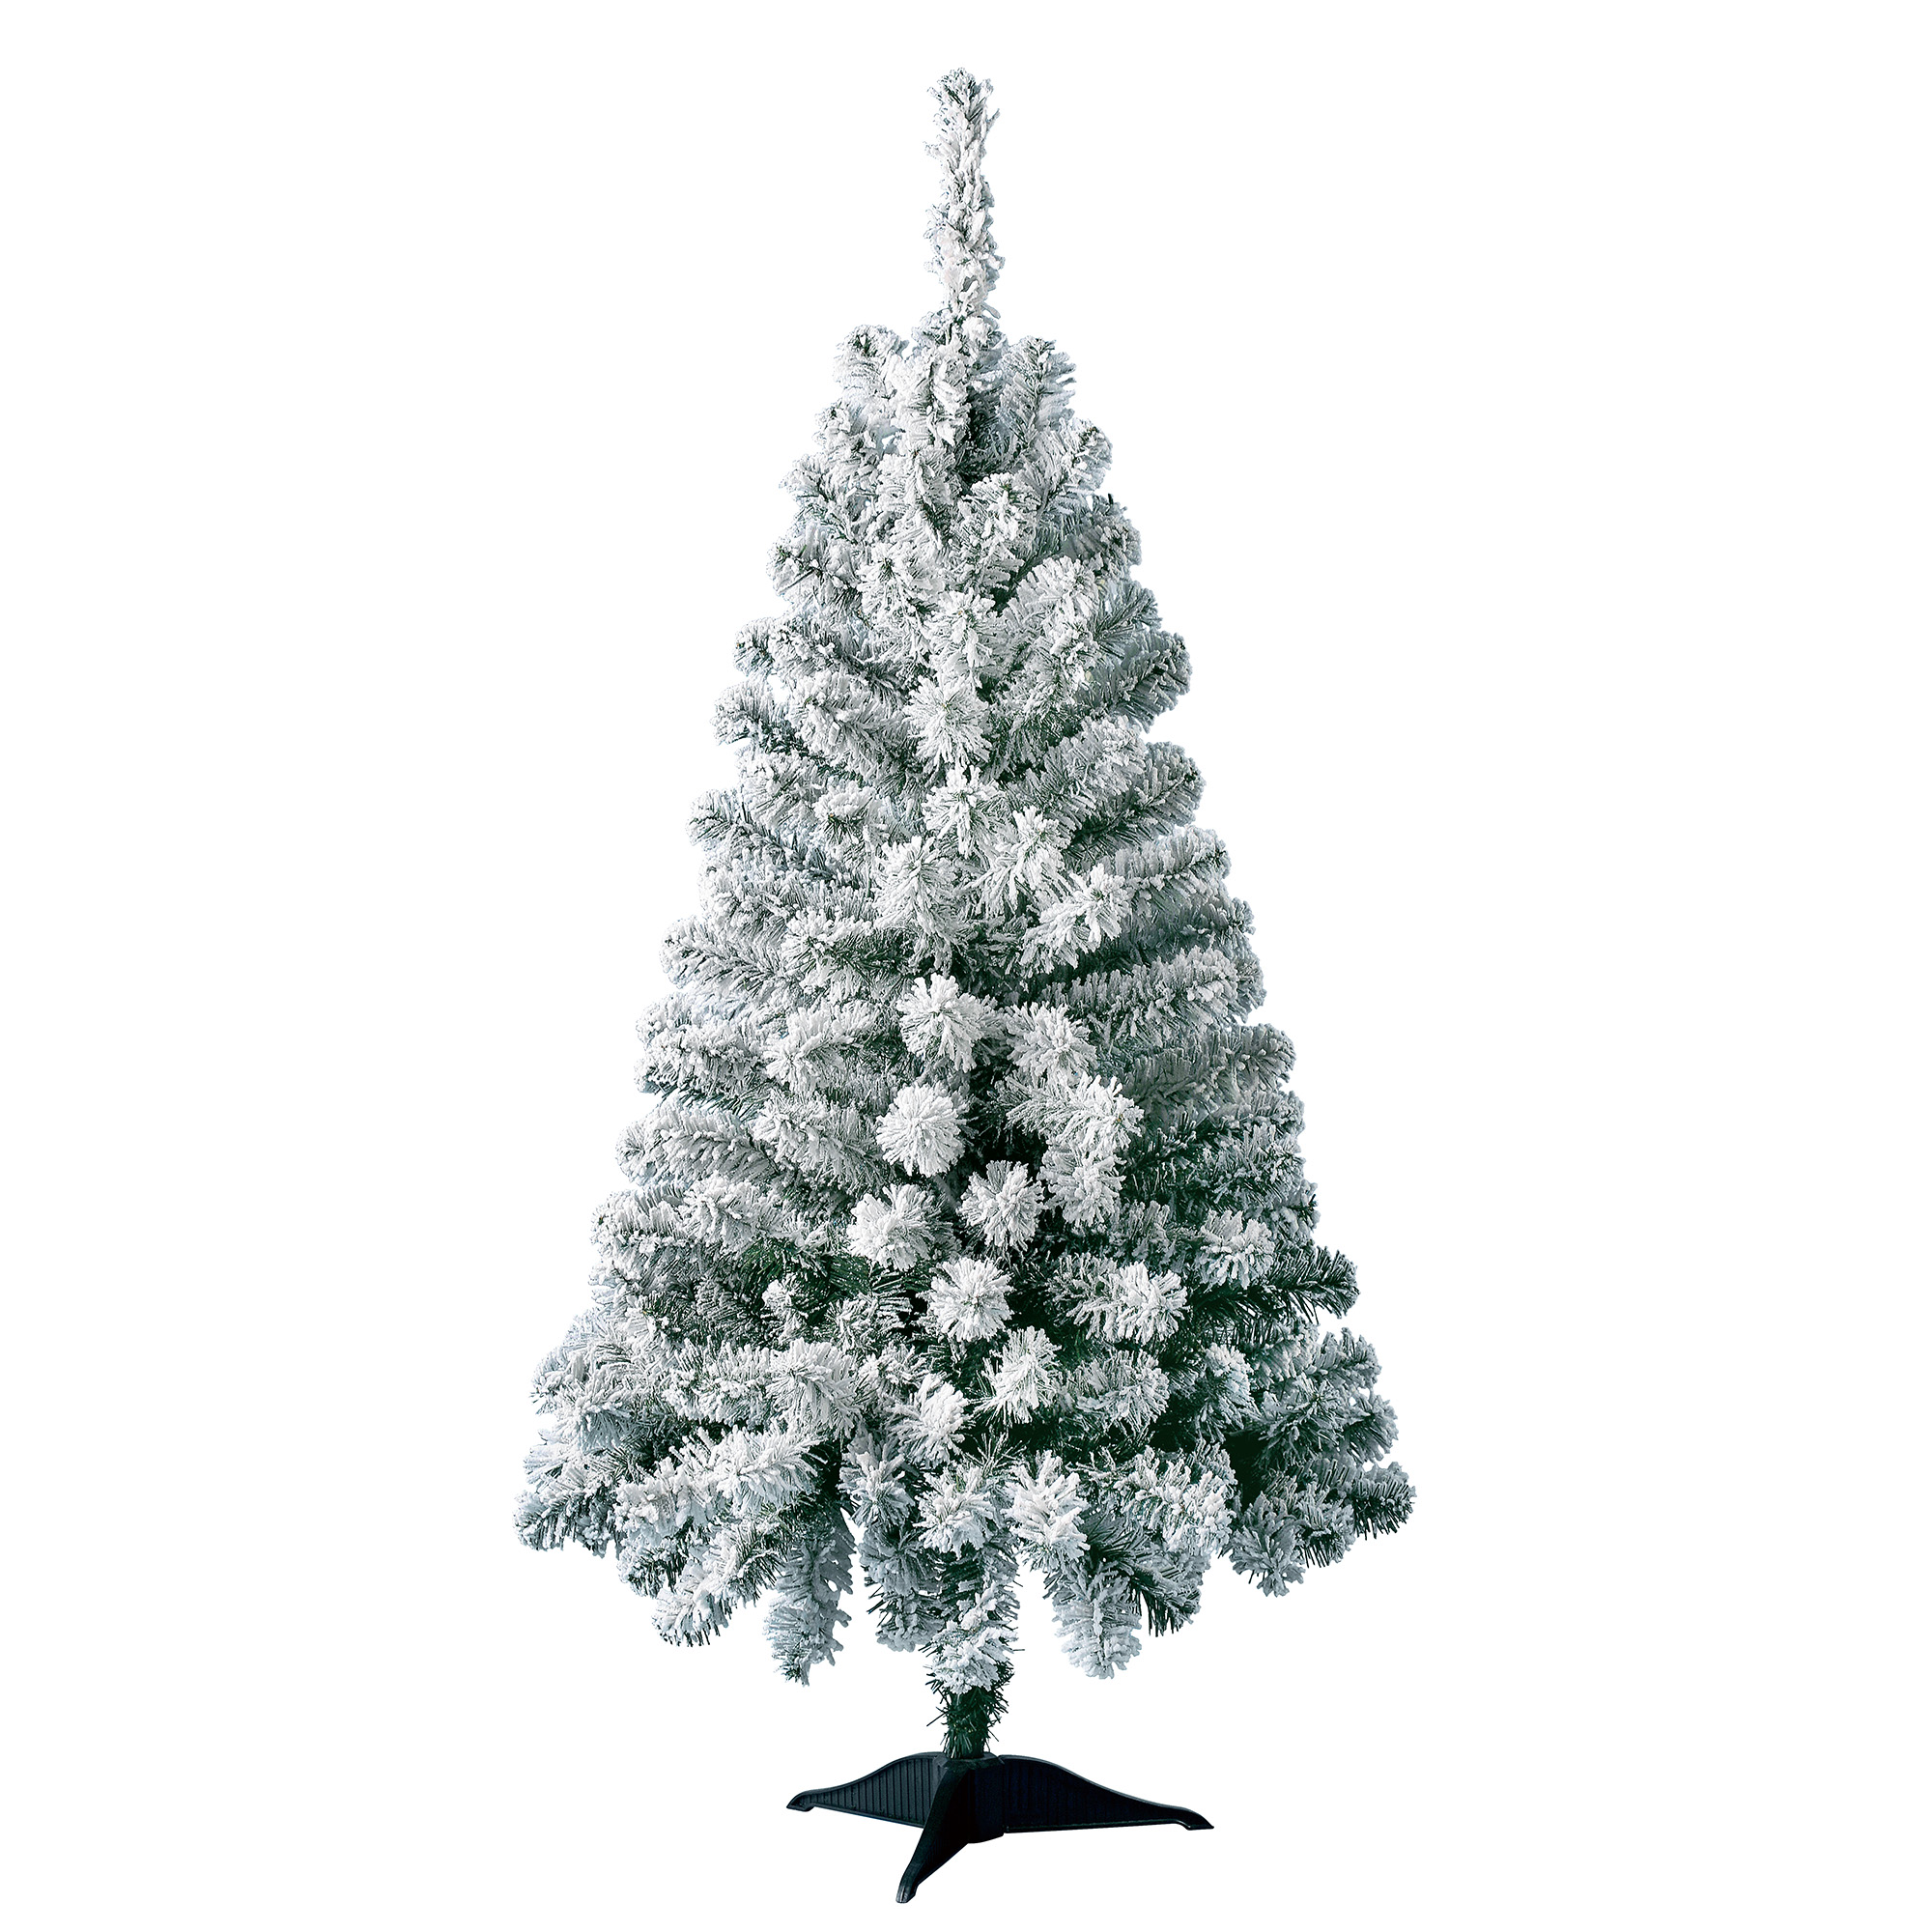 Holiday Time Prelit 105 Clear Incandescent Lights, Greenfield Flocked Pine Artificial Christmas Tree, 4' - image 2 of 7